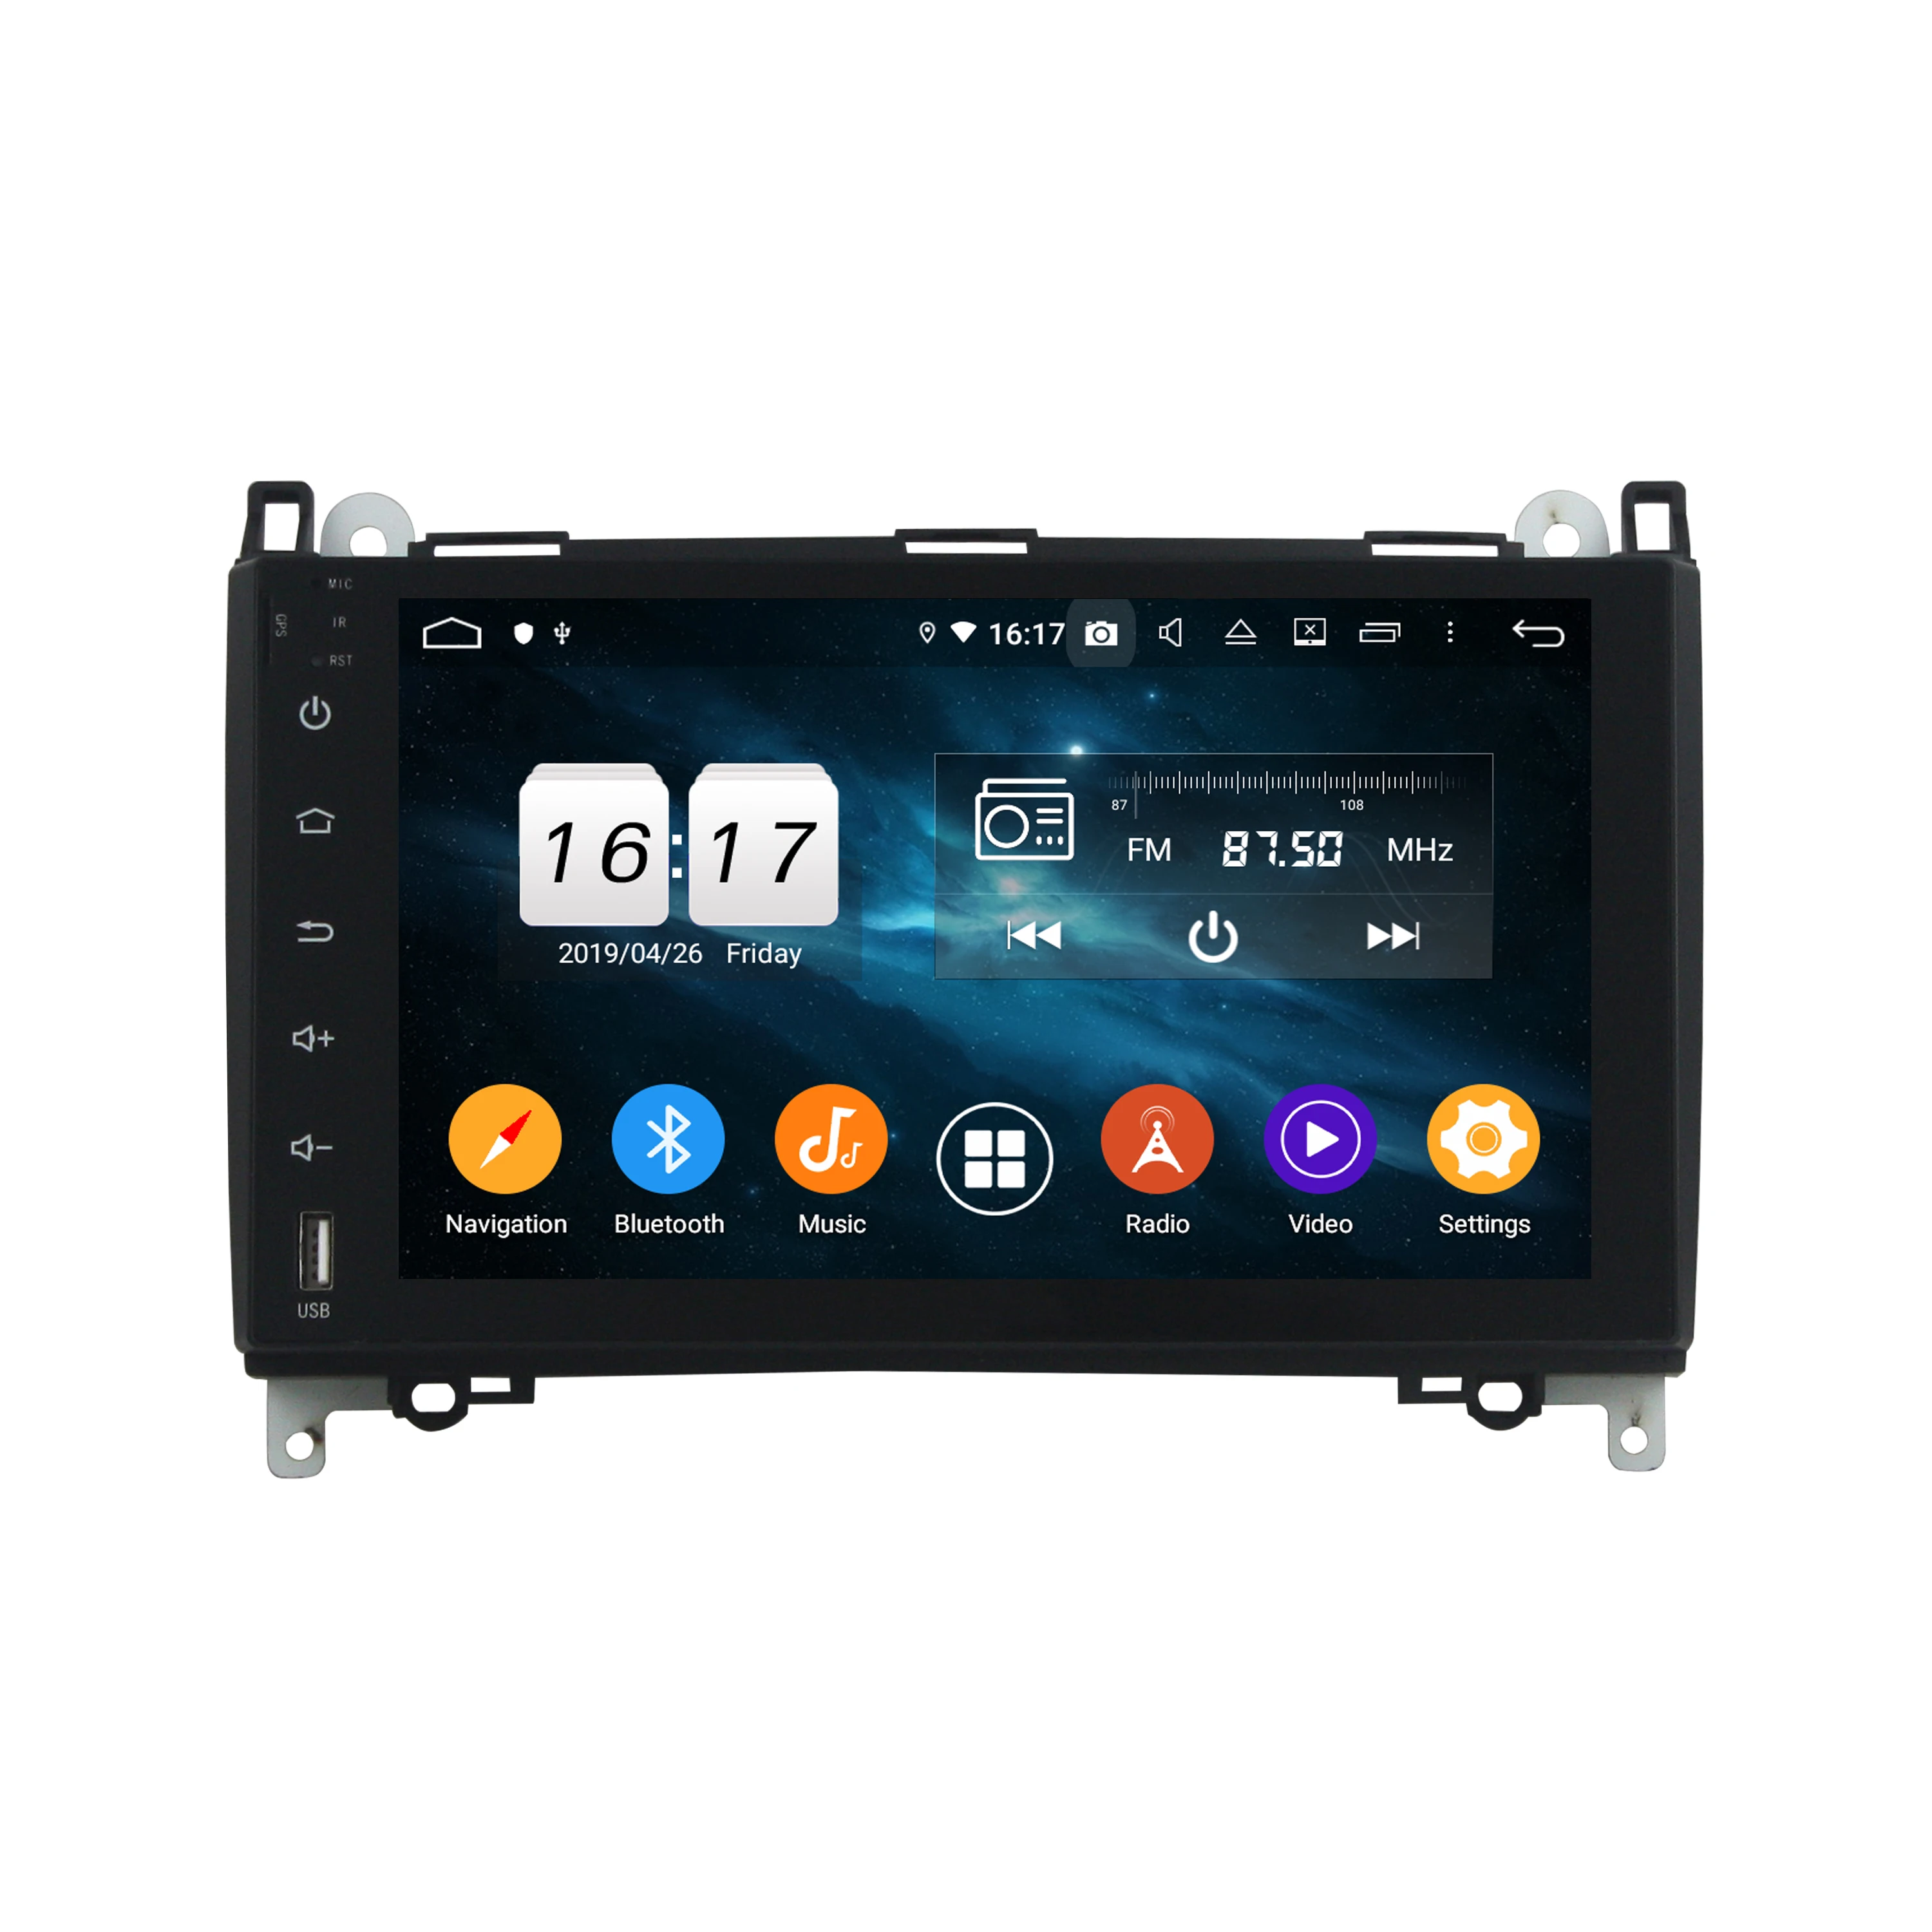 

KD-9011 Android 2din Car Audio Radio for W169 W245 Viano Vito Dsp Navigation Car Stereo Dvd Player A-B Class A-Class W169